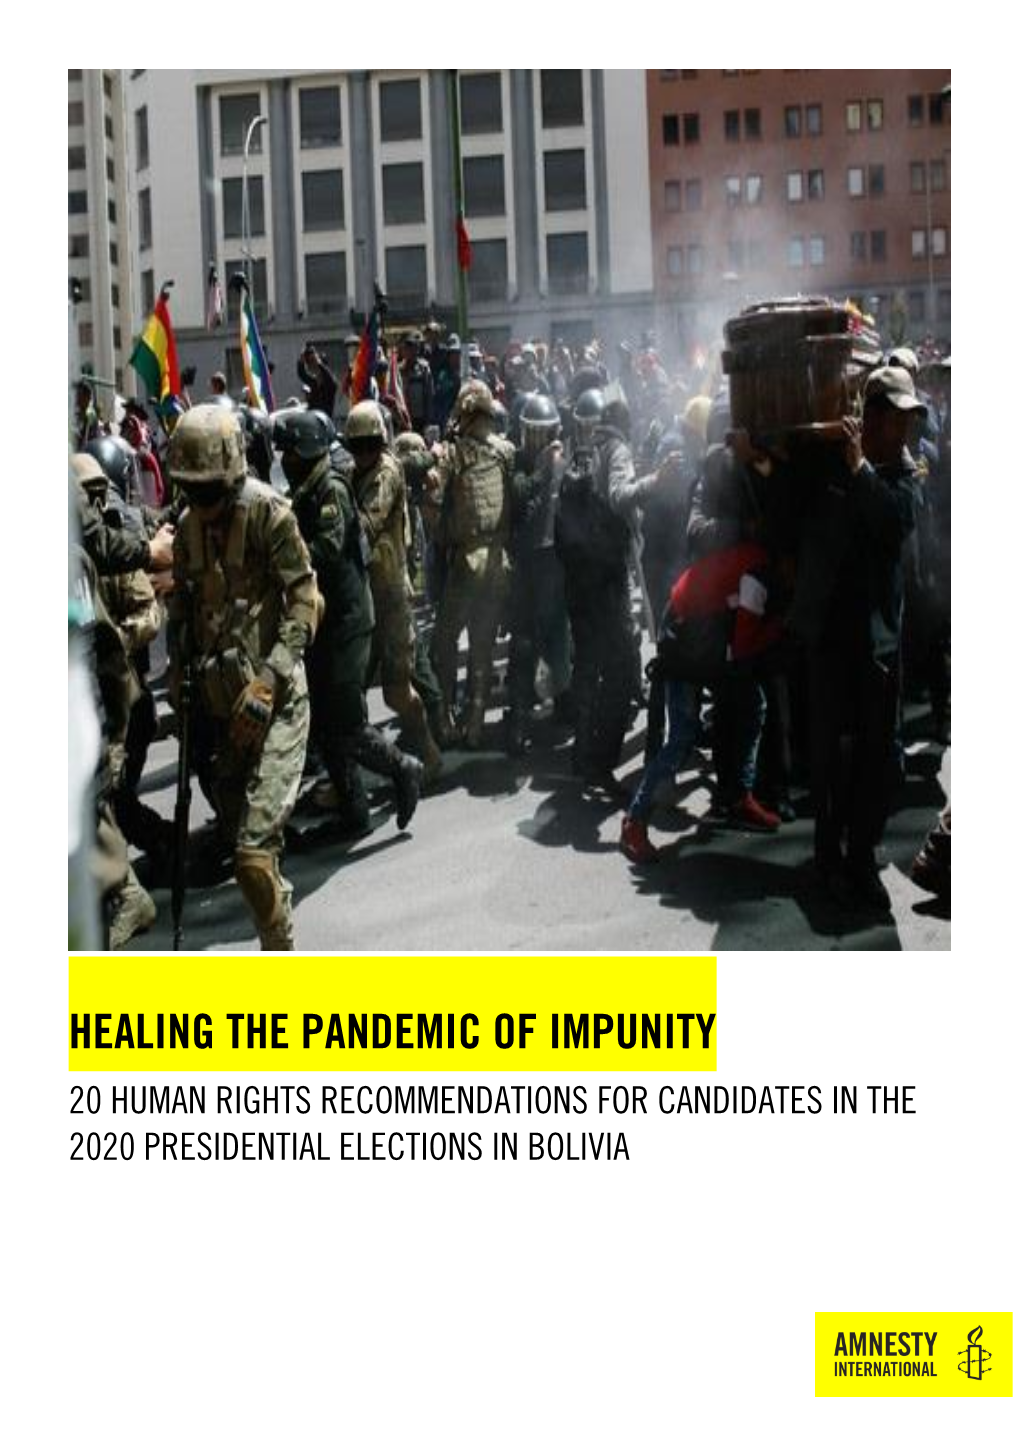 Healing the Pandemic of Impunity 20 Human Rights Recommendations for Candidates in the 2020 Presidential Elections in Bolivia